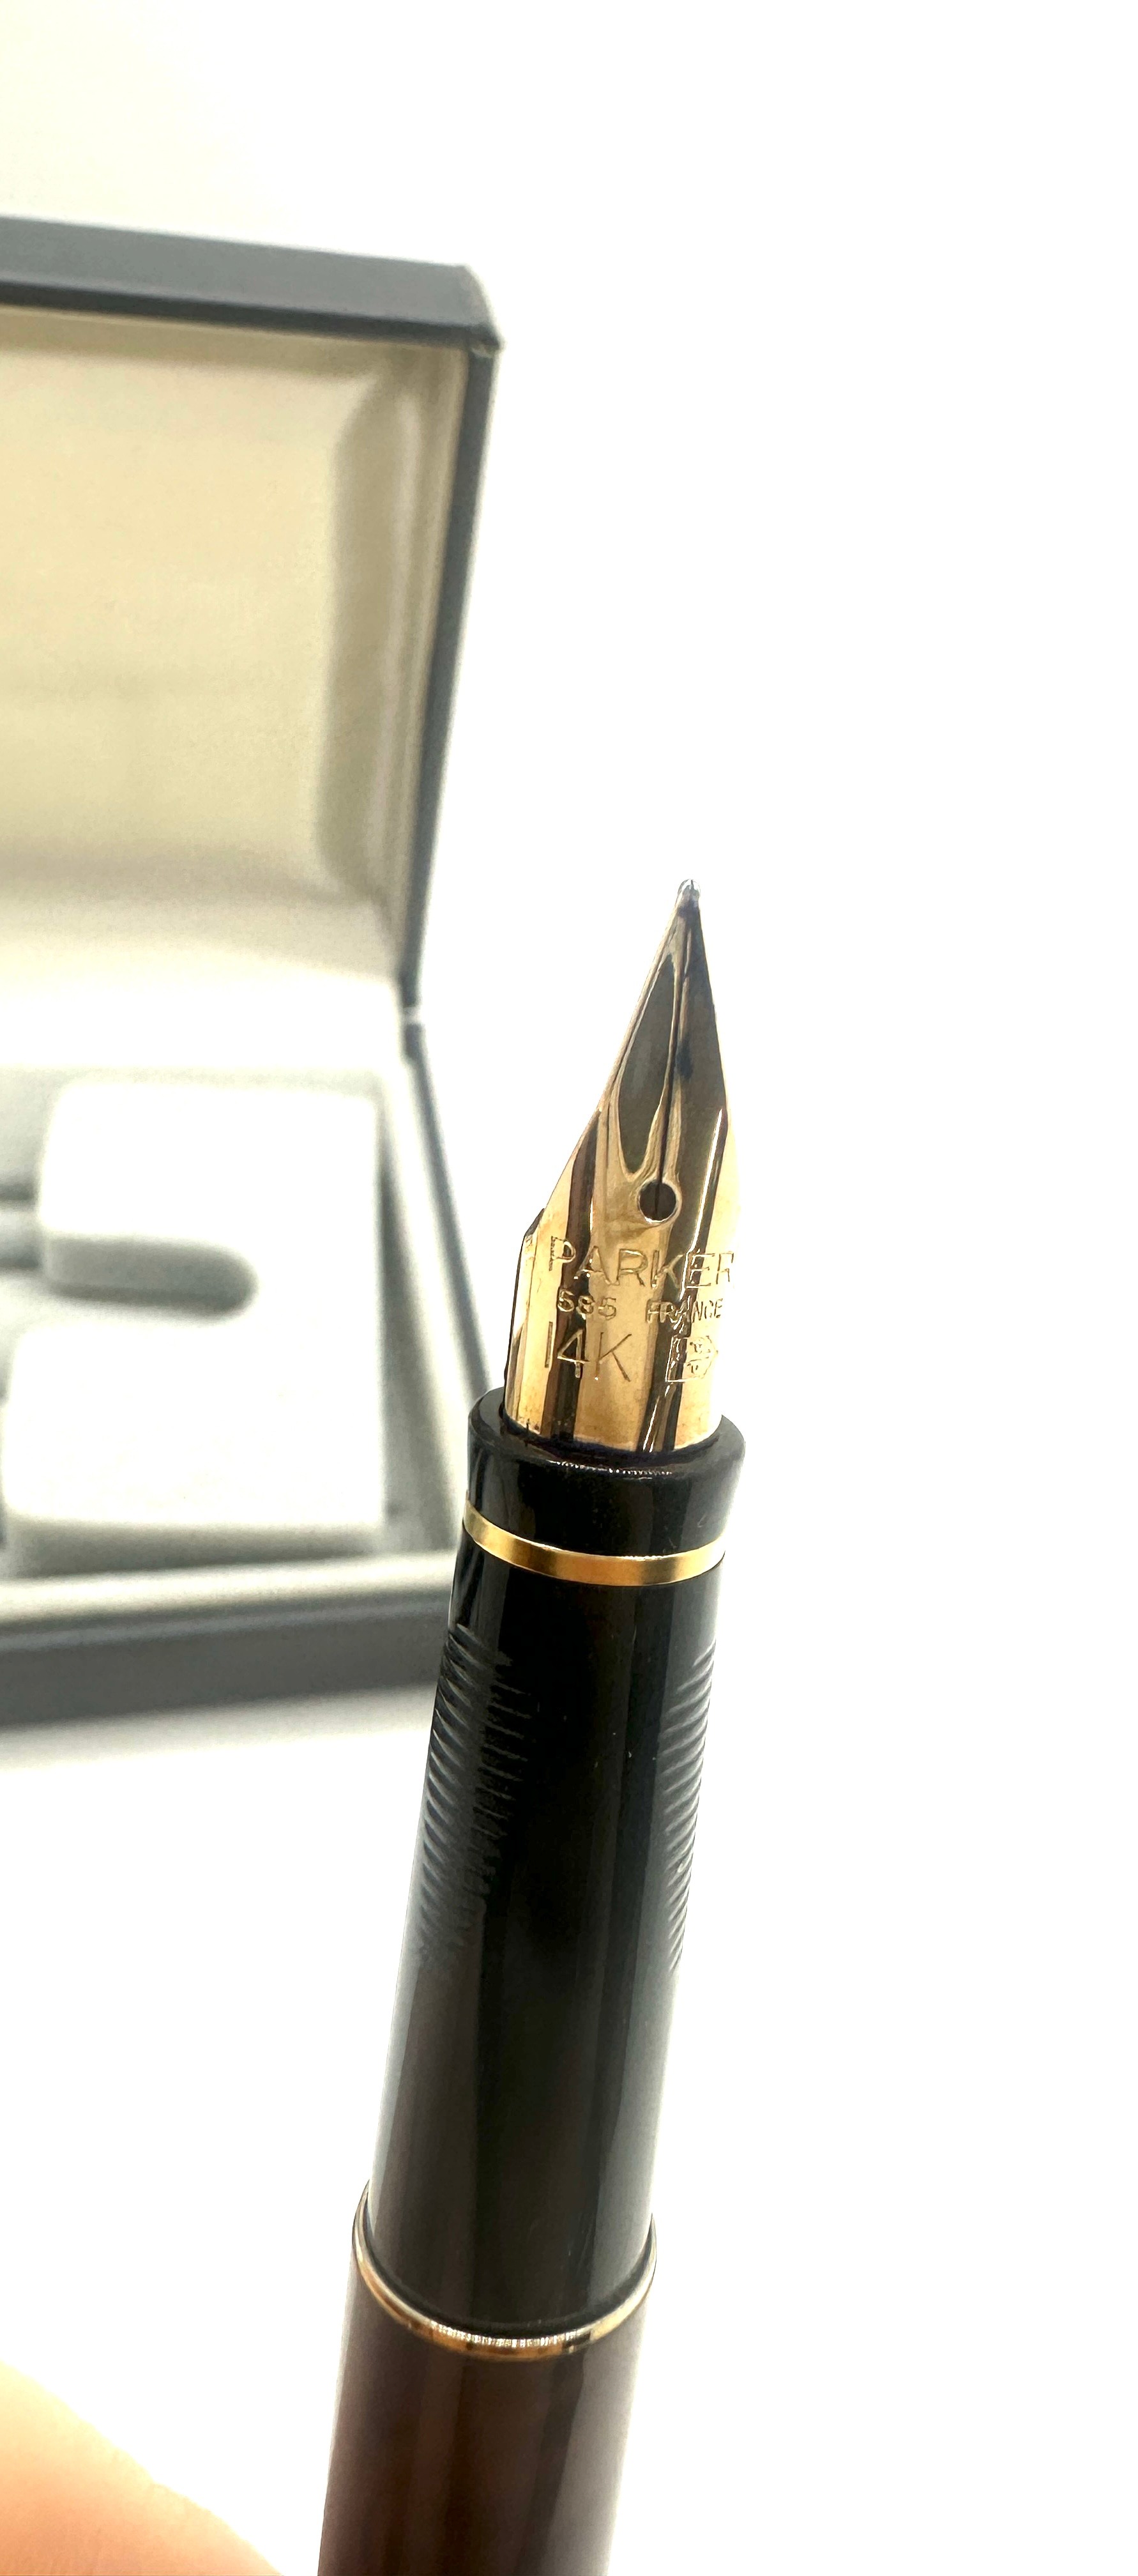 Boxed unused parker thuya 4173 with 14ct gold nib - Image 5 of 8